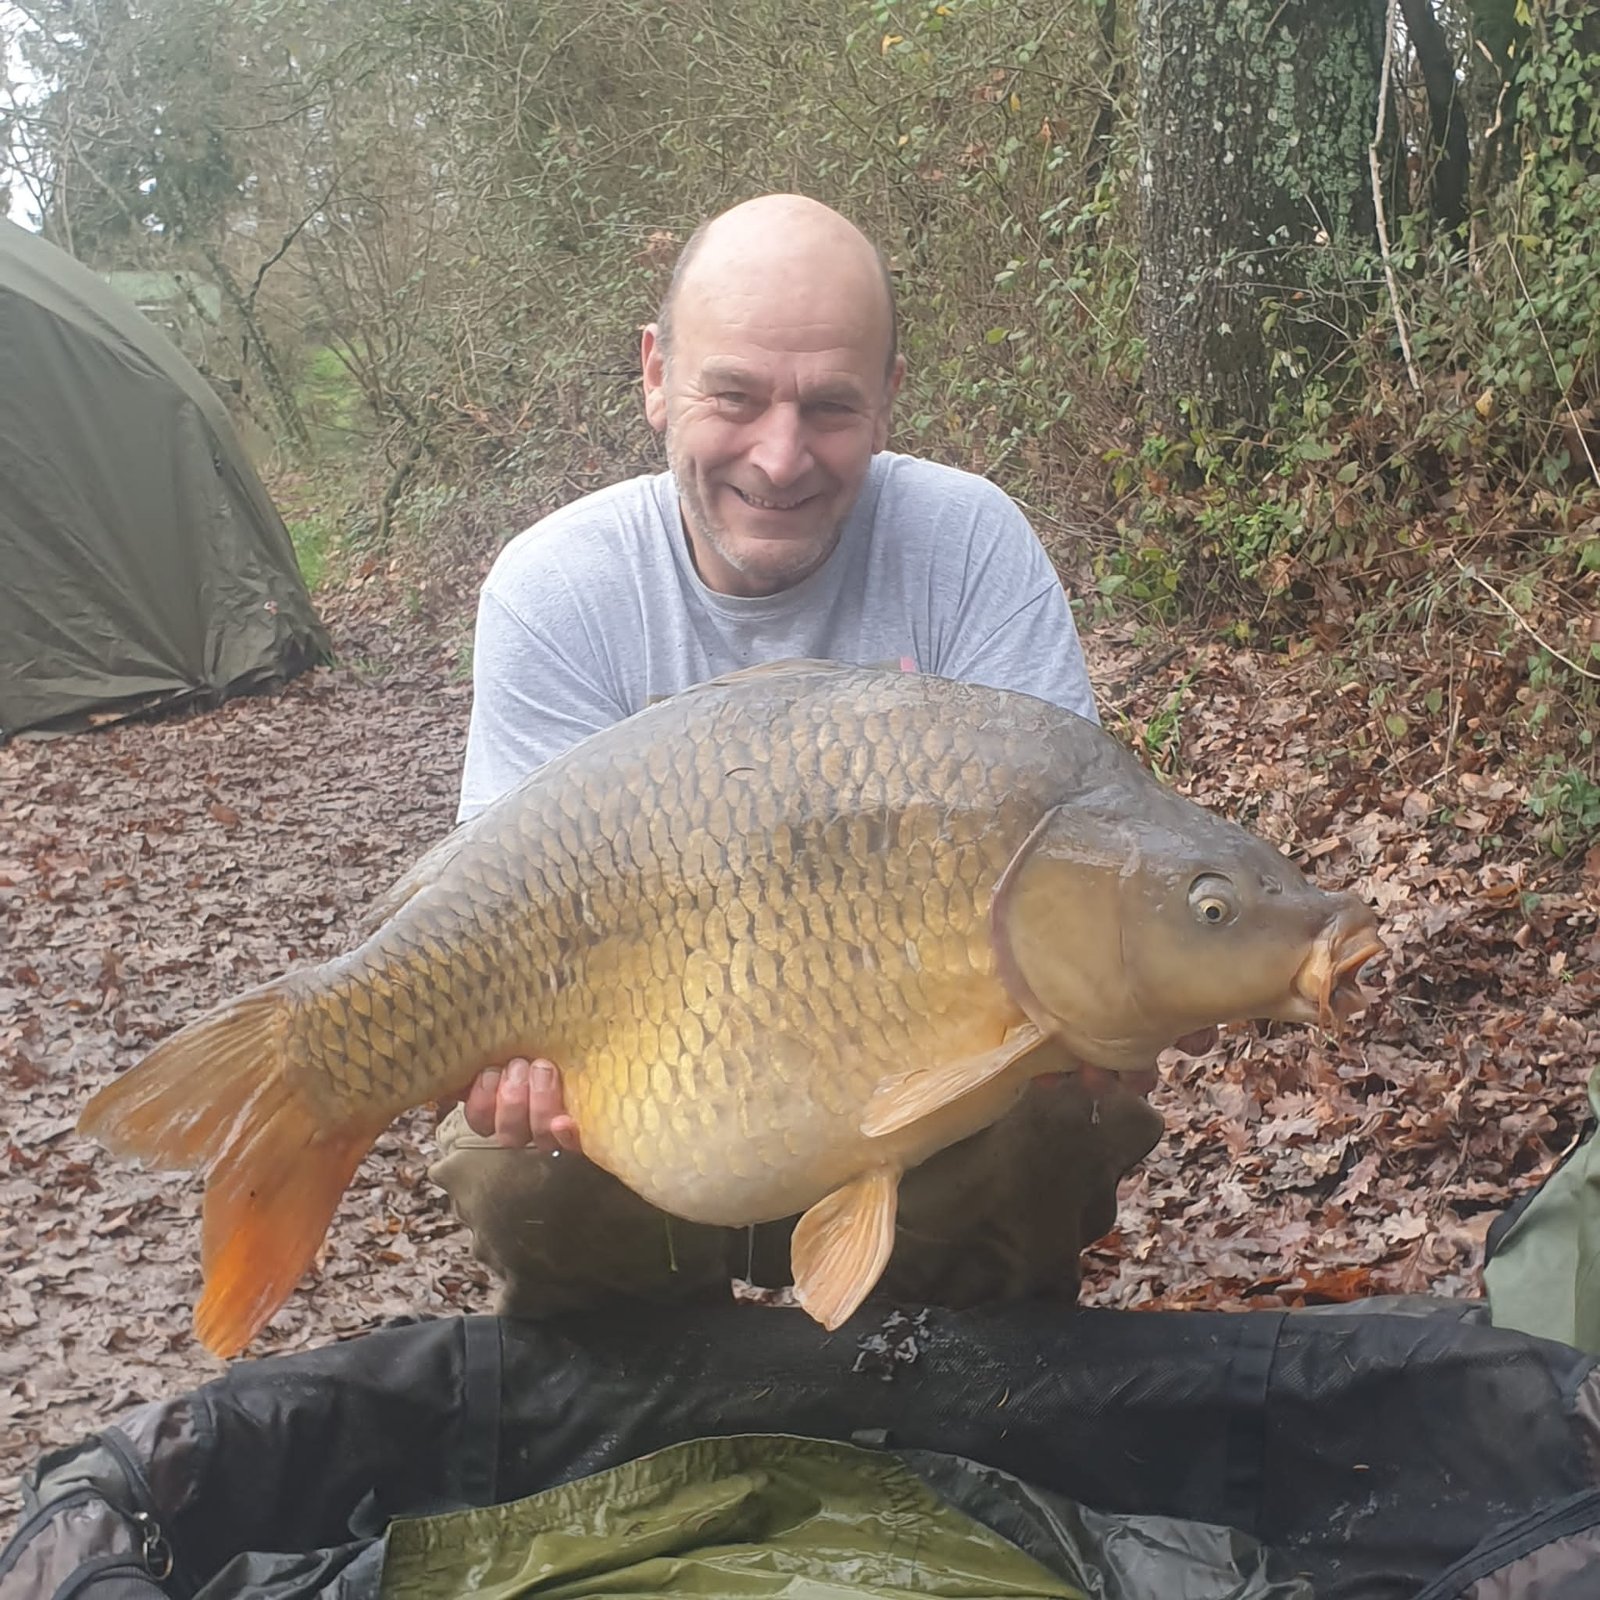 Carp catch shot submitted by Stuart Petre